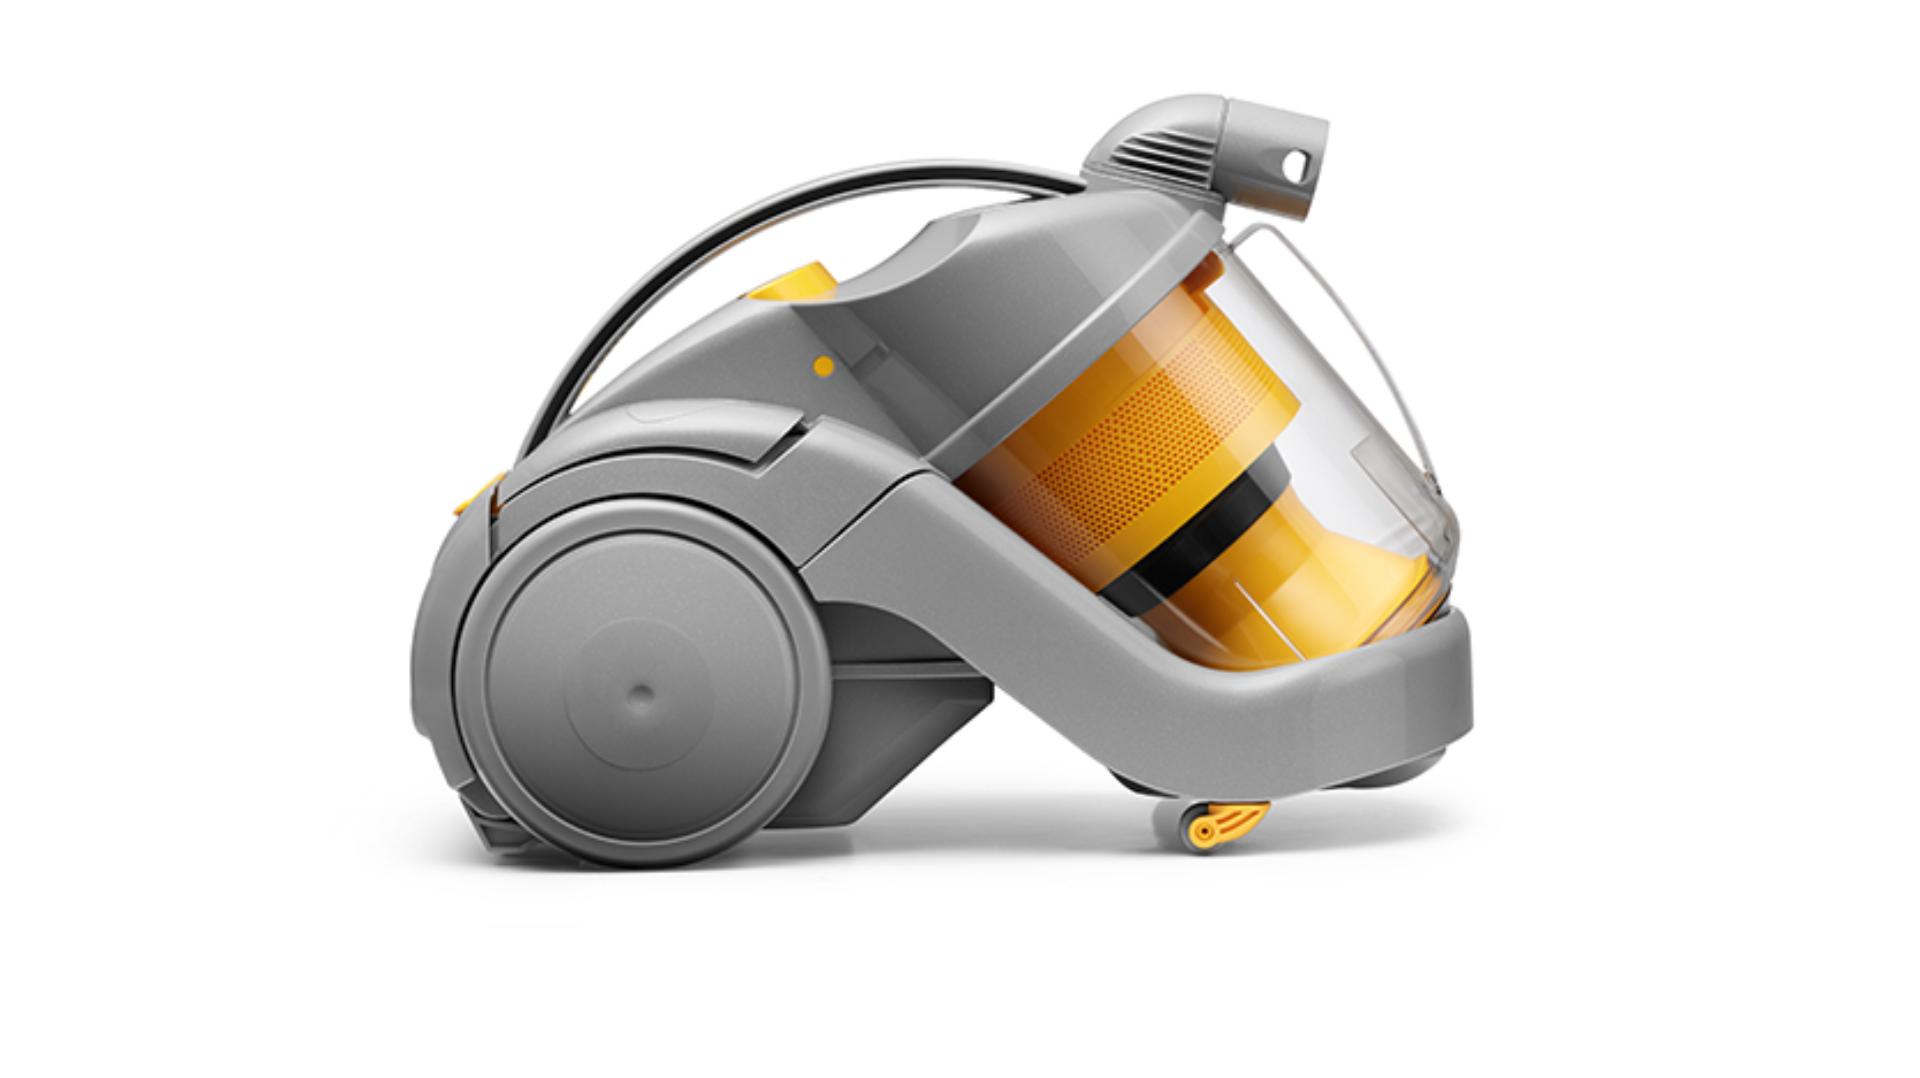 Side view of DC02 cylinder vacuum, yellow and grey